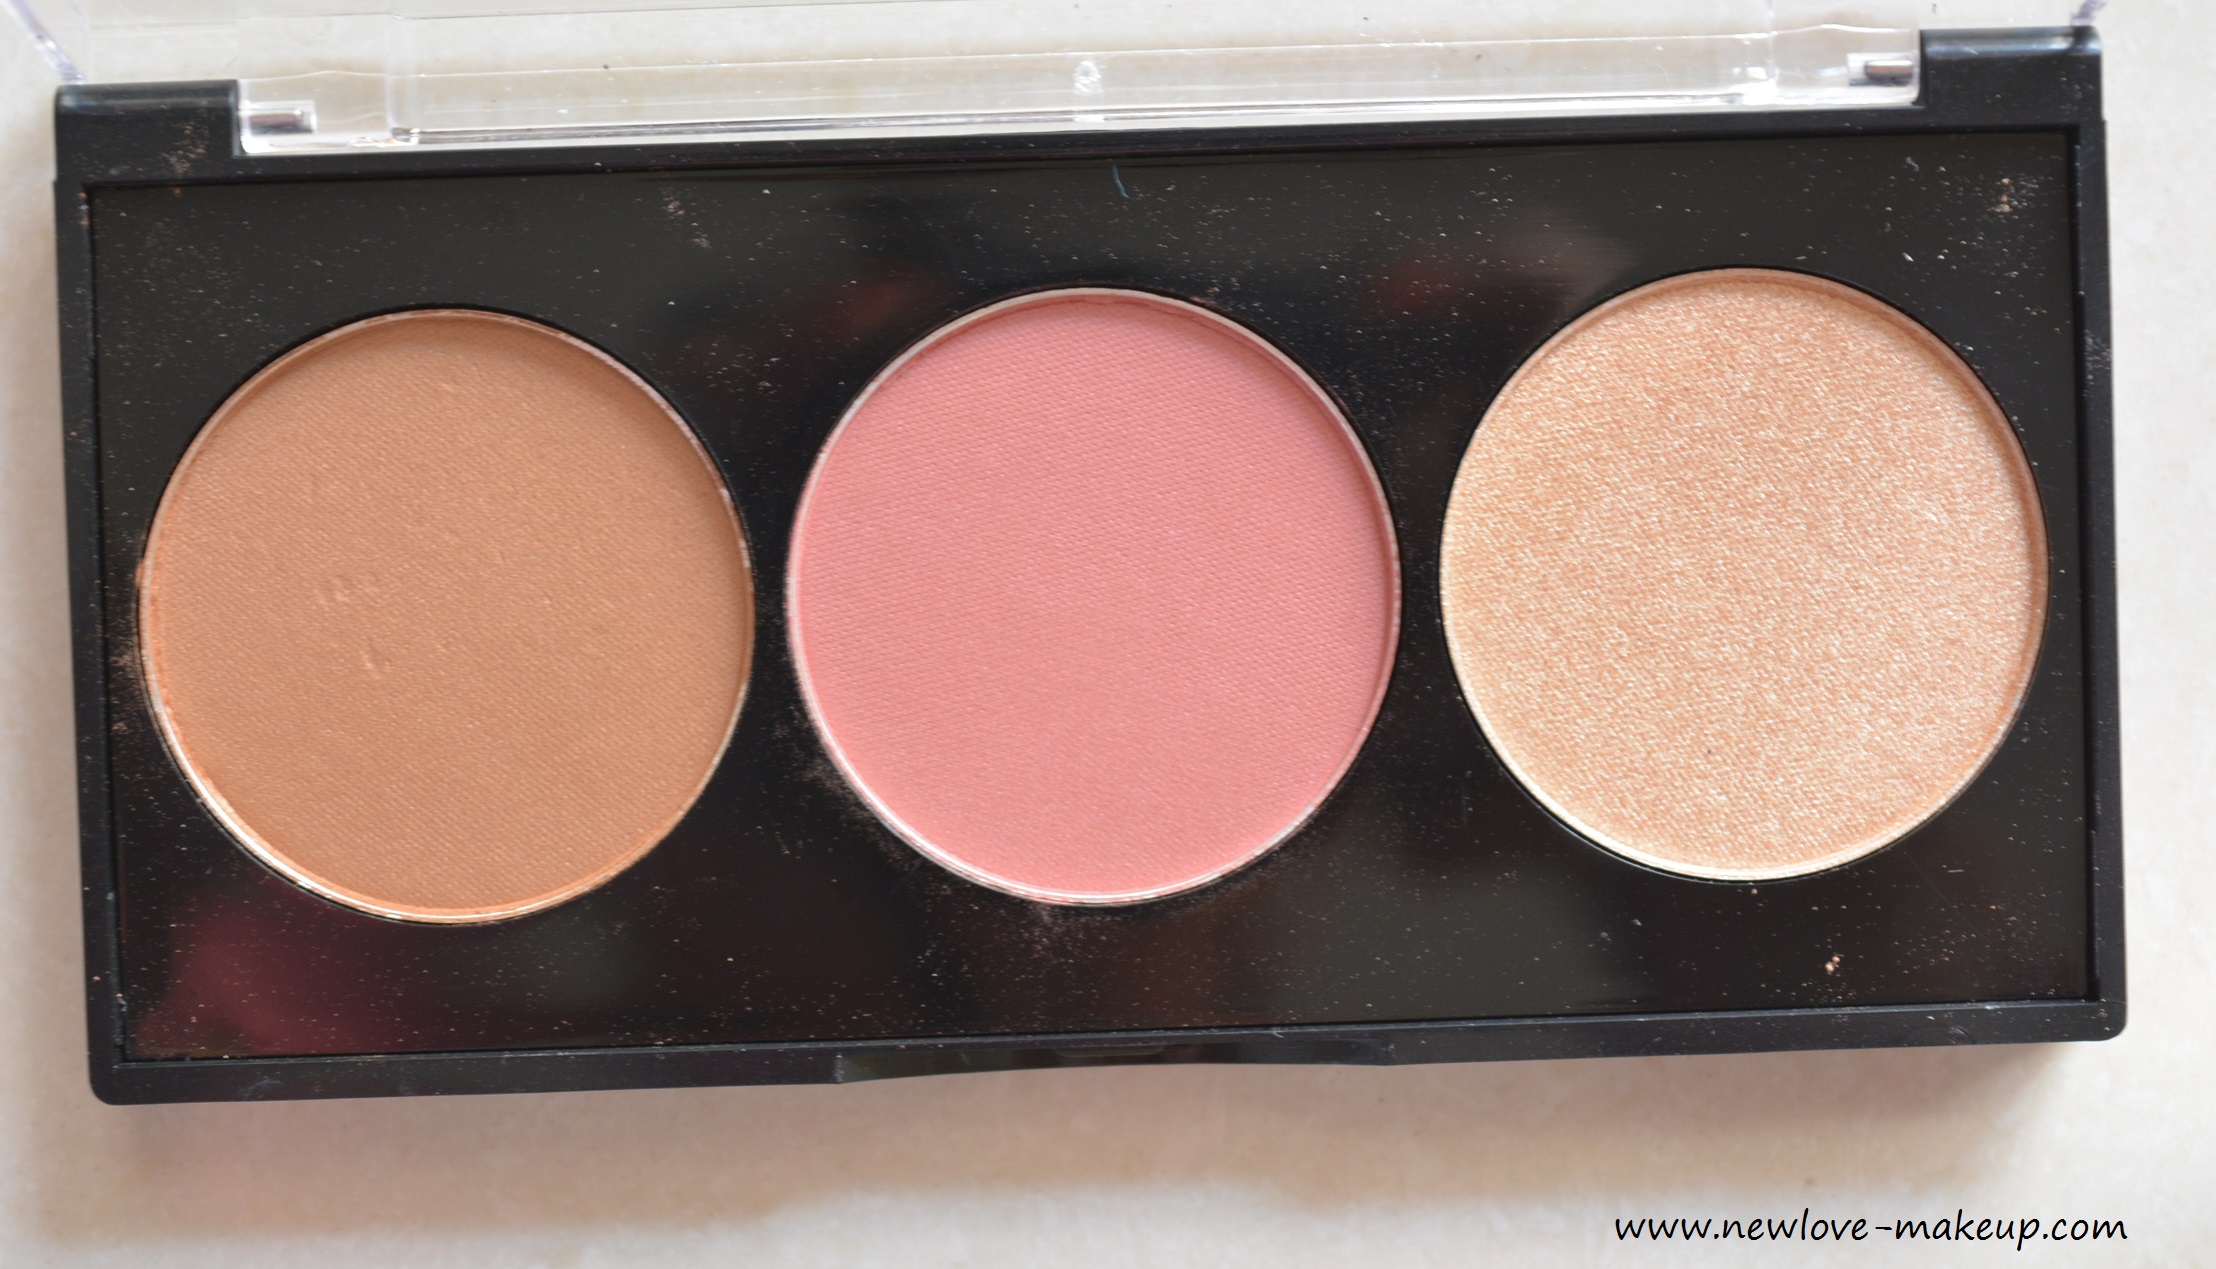 Faces Ultime Pro Face Palette Fresh, Glow Review & Swatches